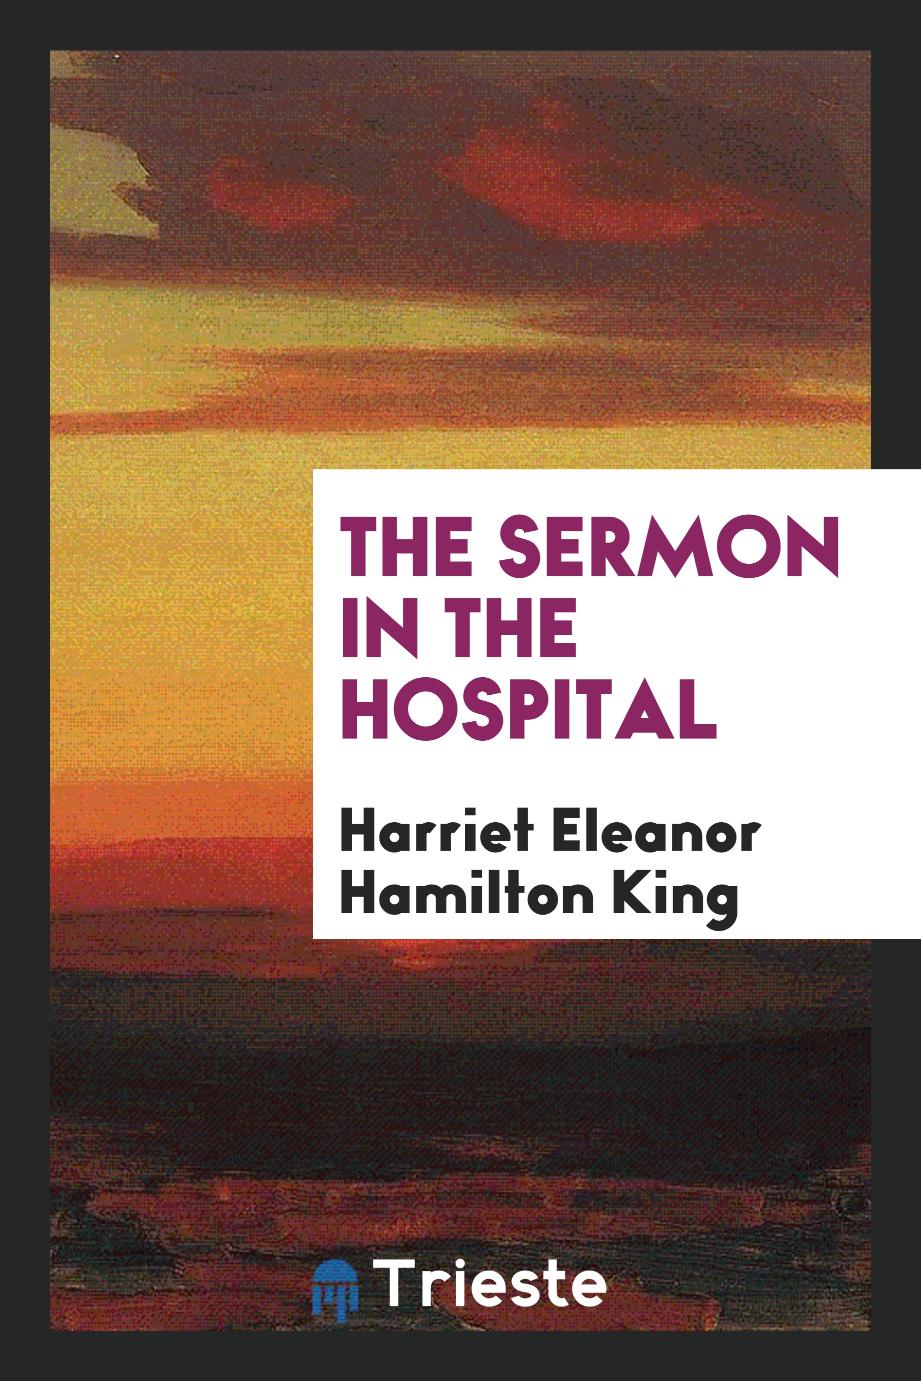 The Sermon in the Hospital